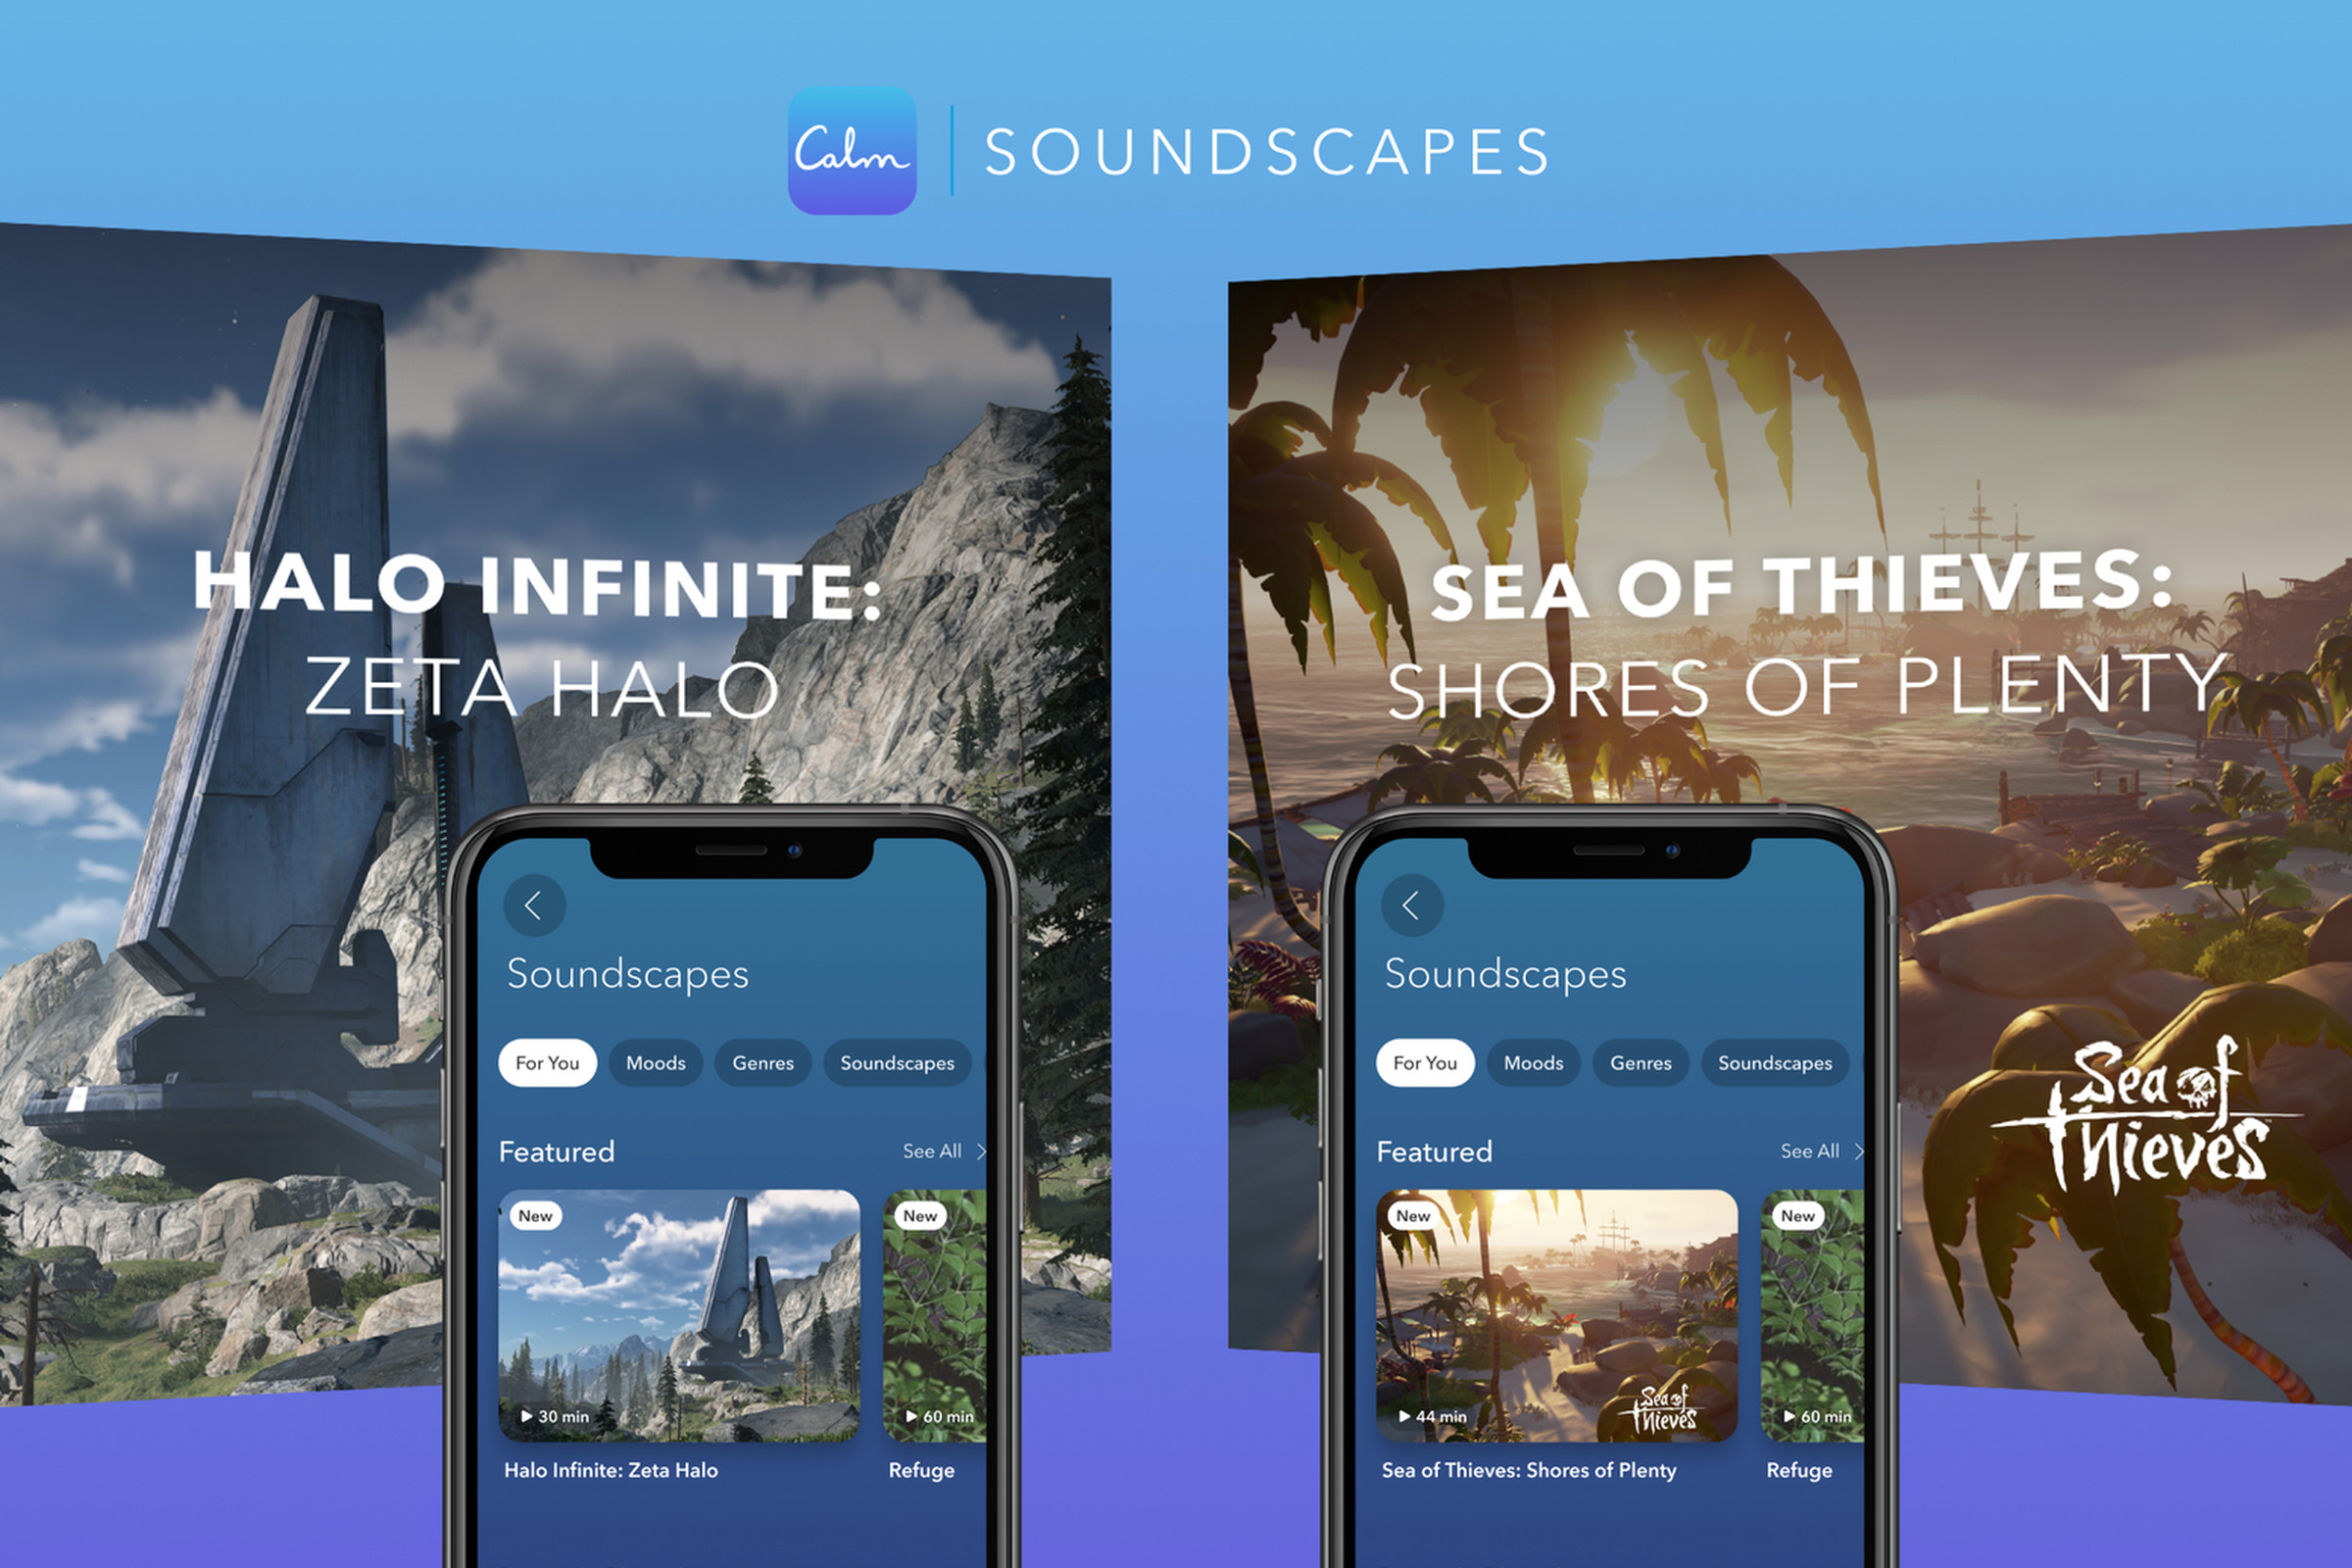 Two mobile phones displaying artworks for Calm soundscapes. The music is based on Sea of Thieves and Halo Infinite game franchises.